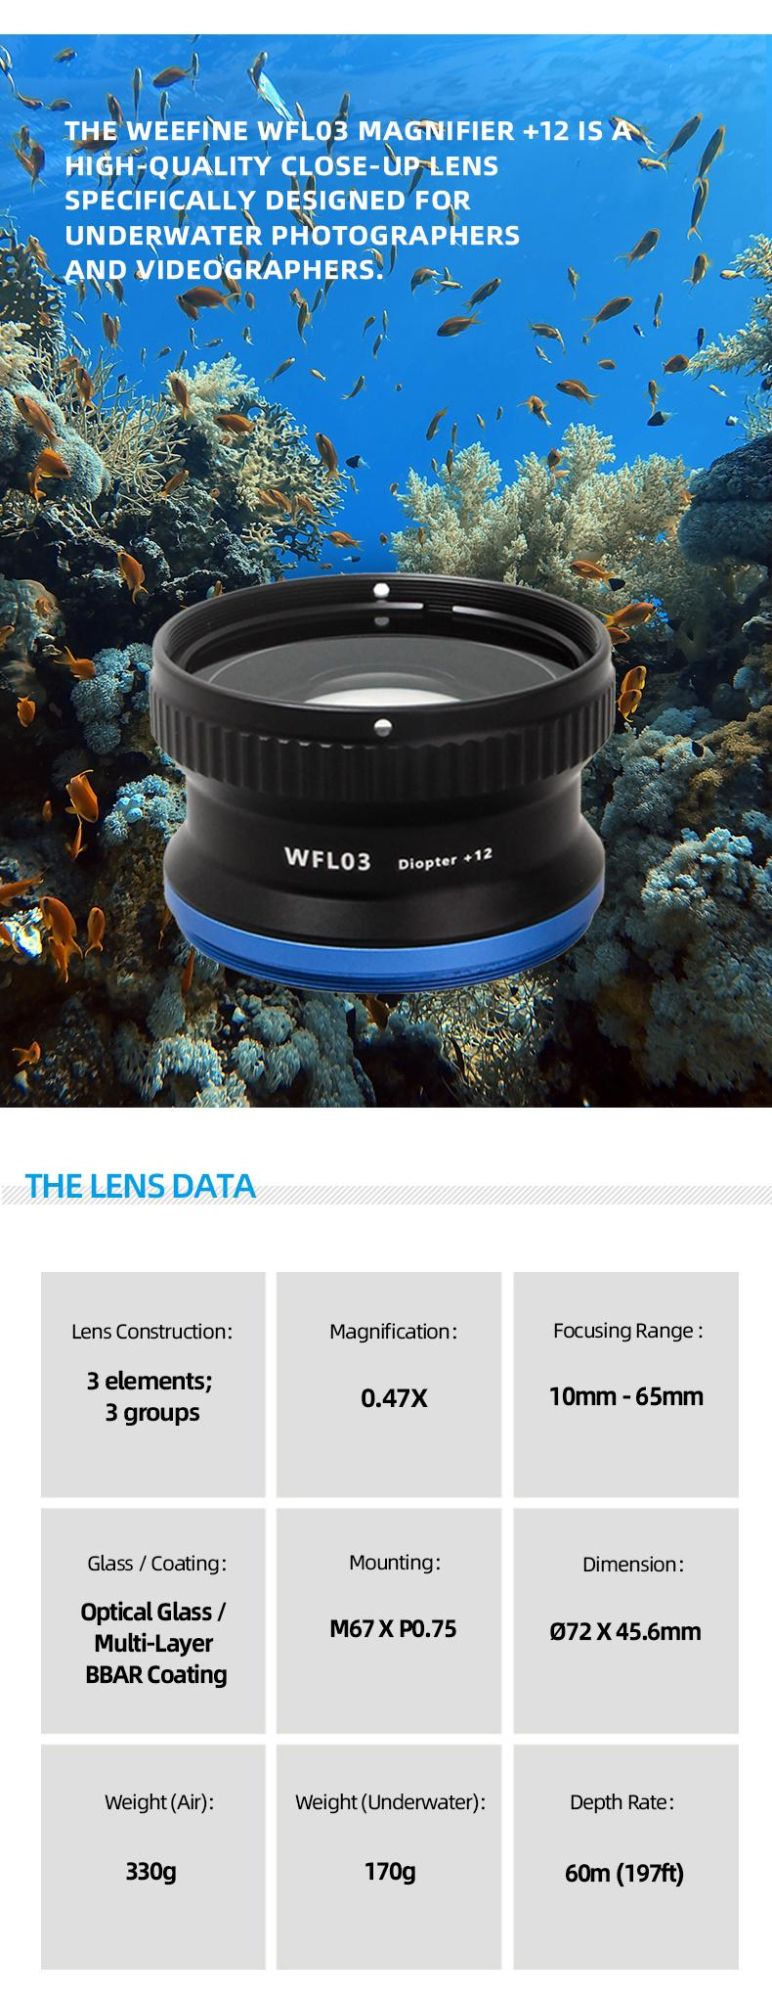 High-Quality Close-up Lens Optical Camera Lens Specifically Designed for Underwater Photographers